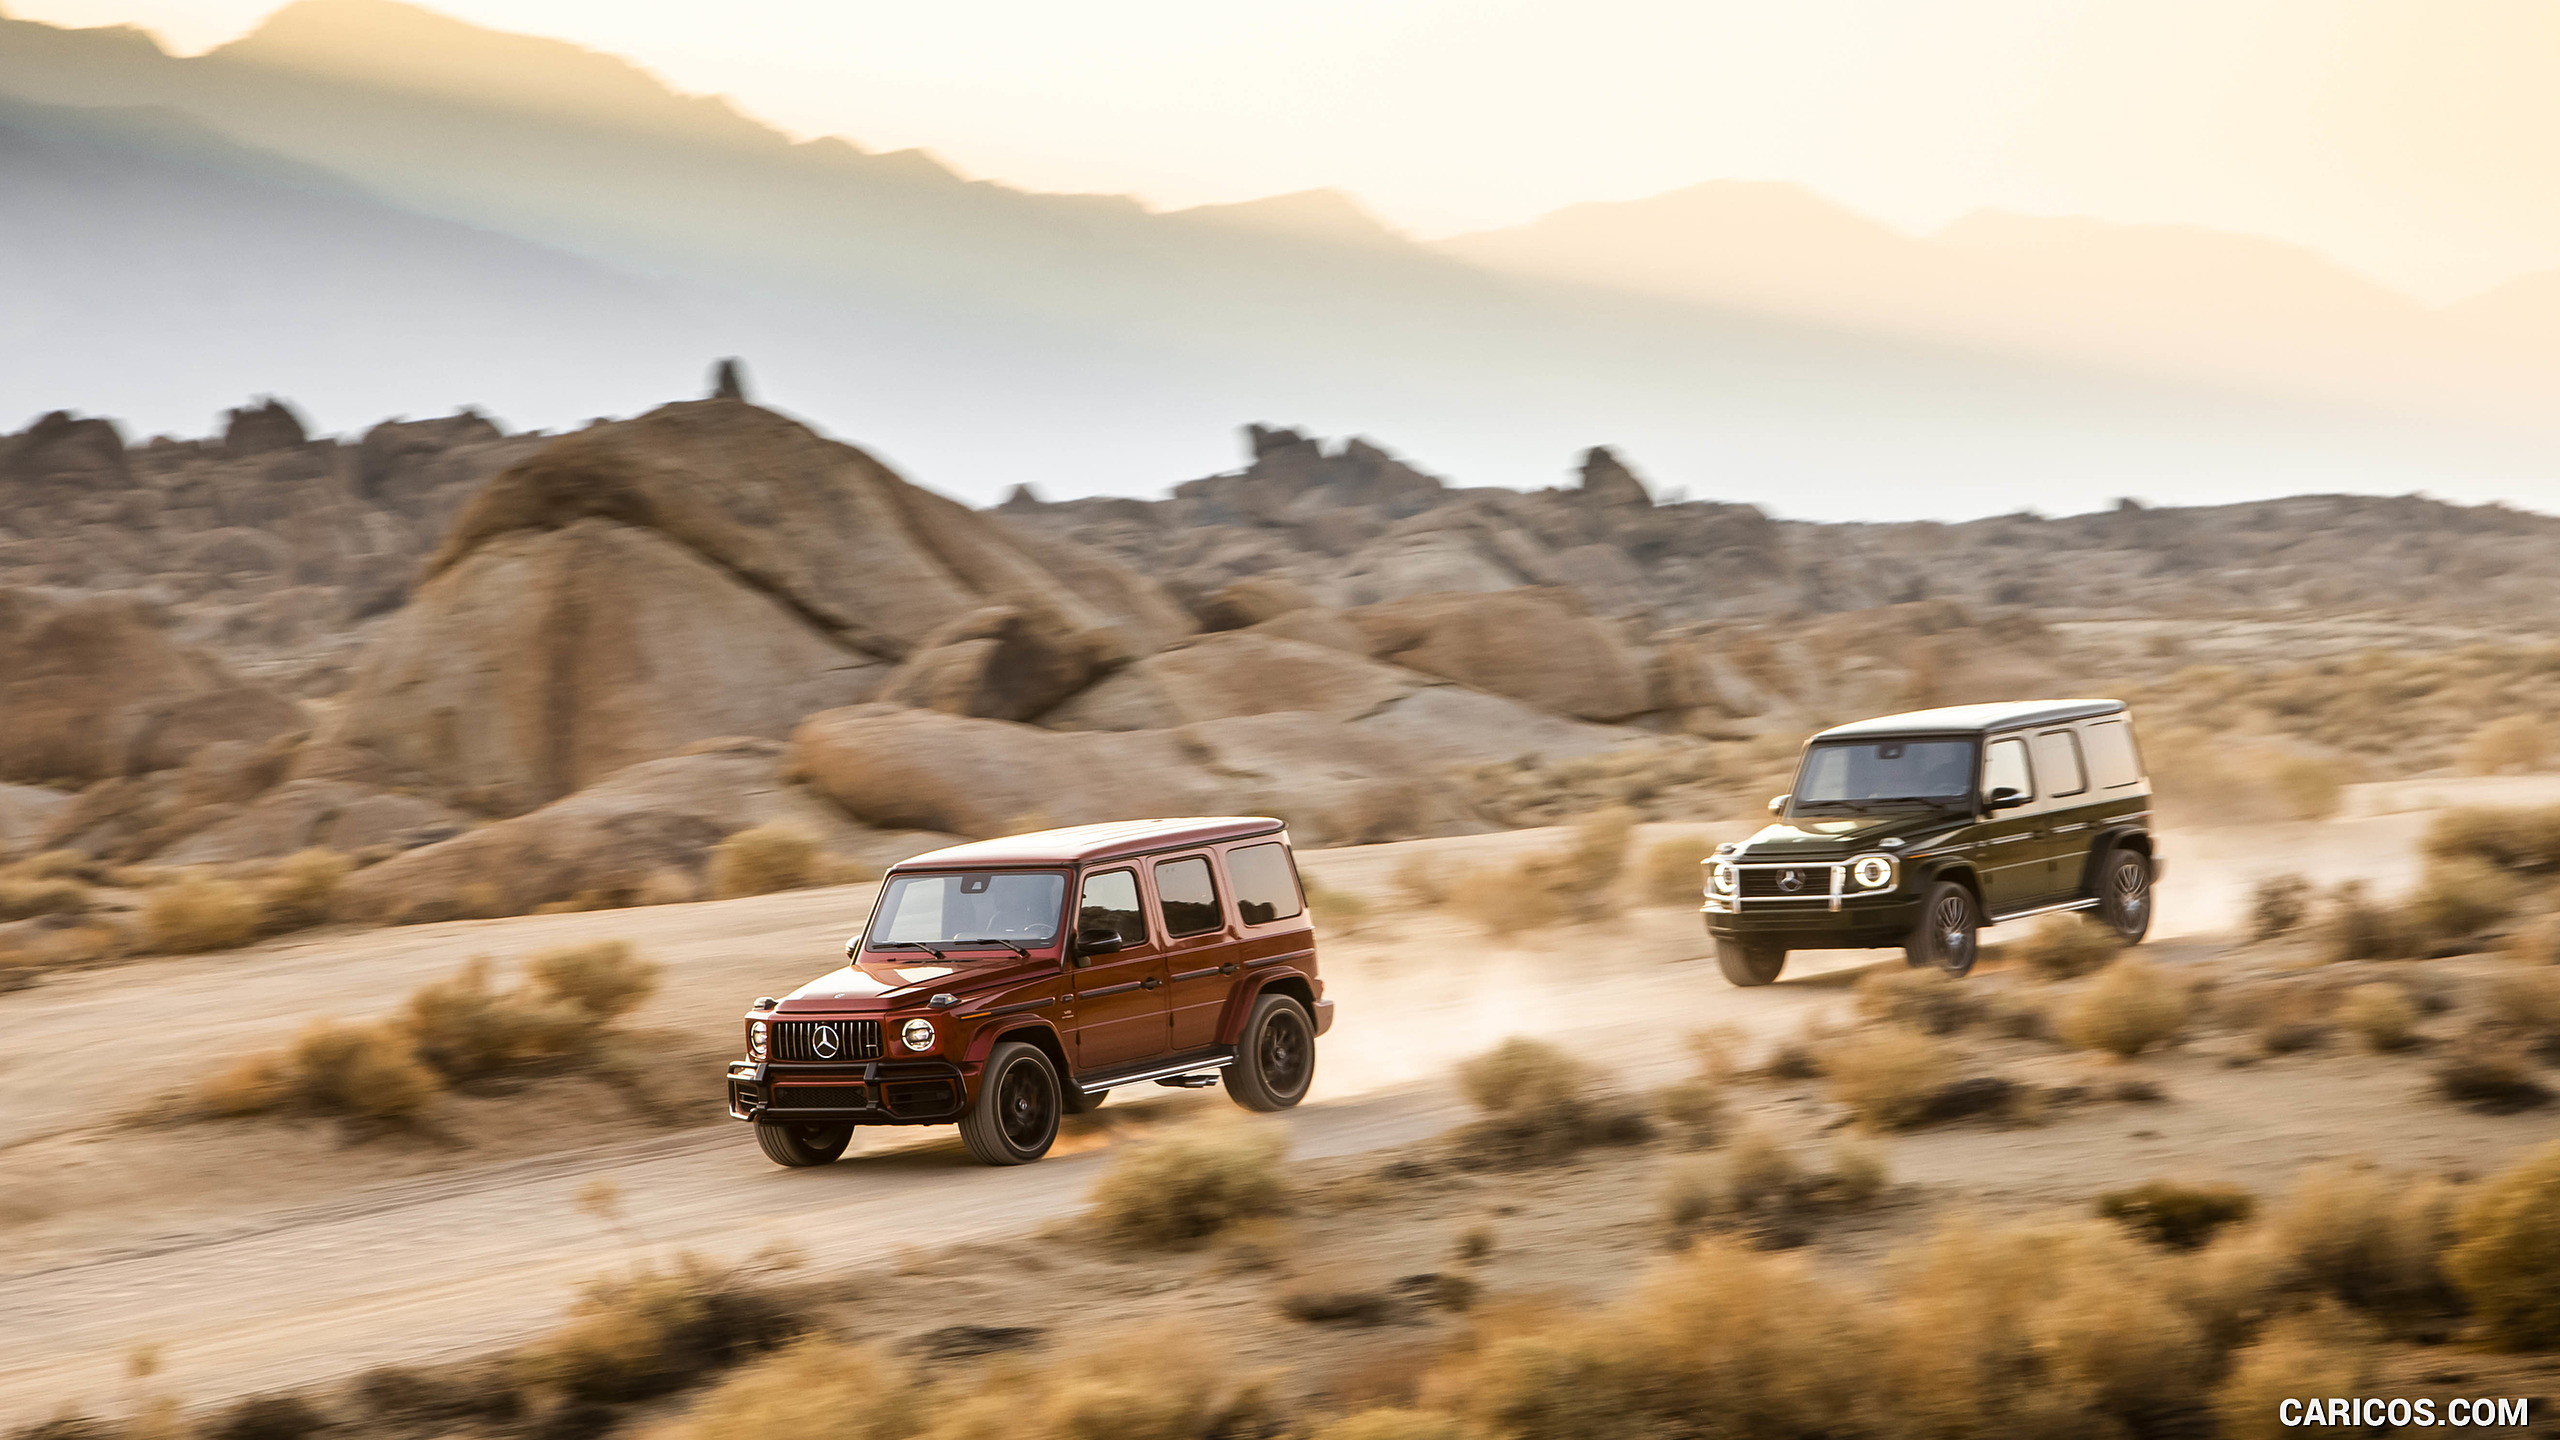 2019 Mercedes-AMG G63 (U.S.-Spec) and 2019 G550, #345 of 452